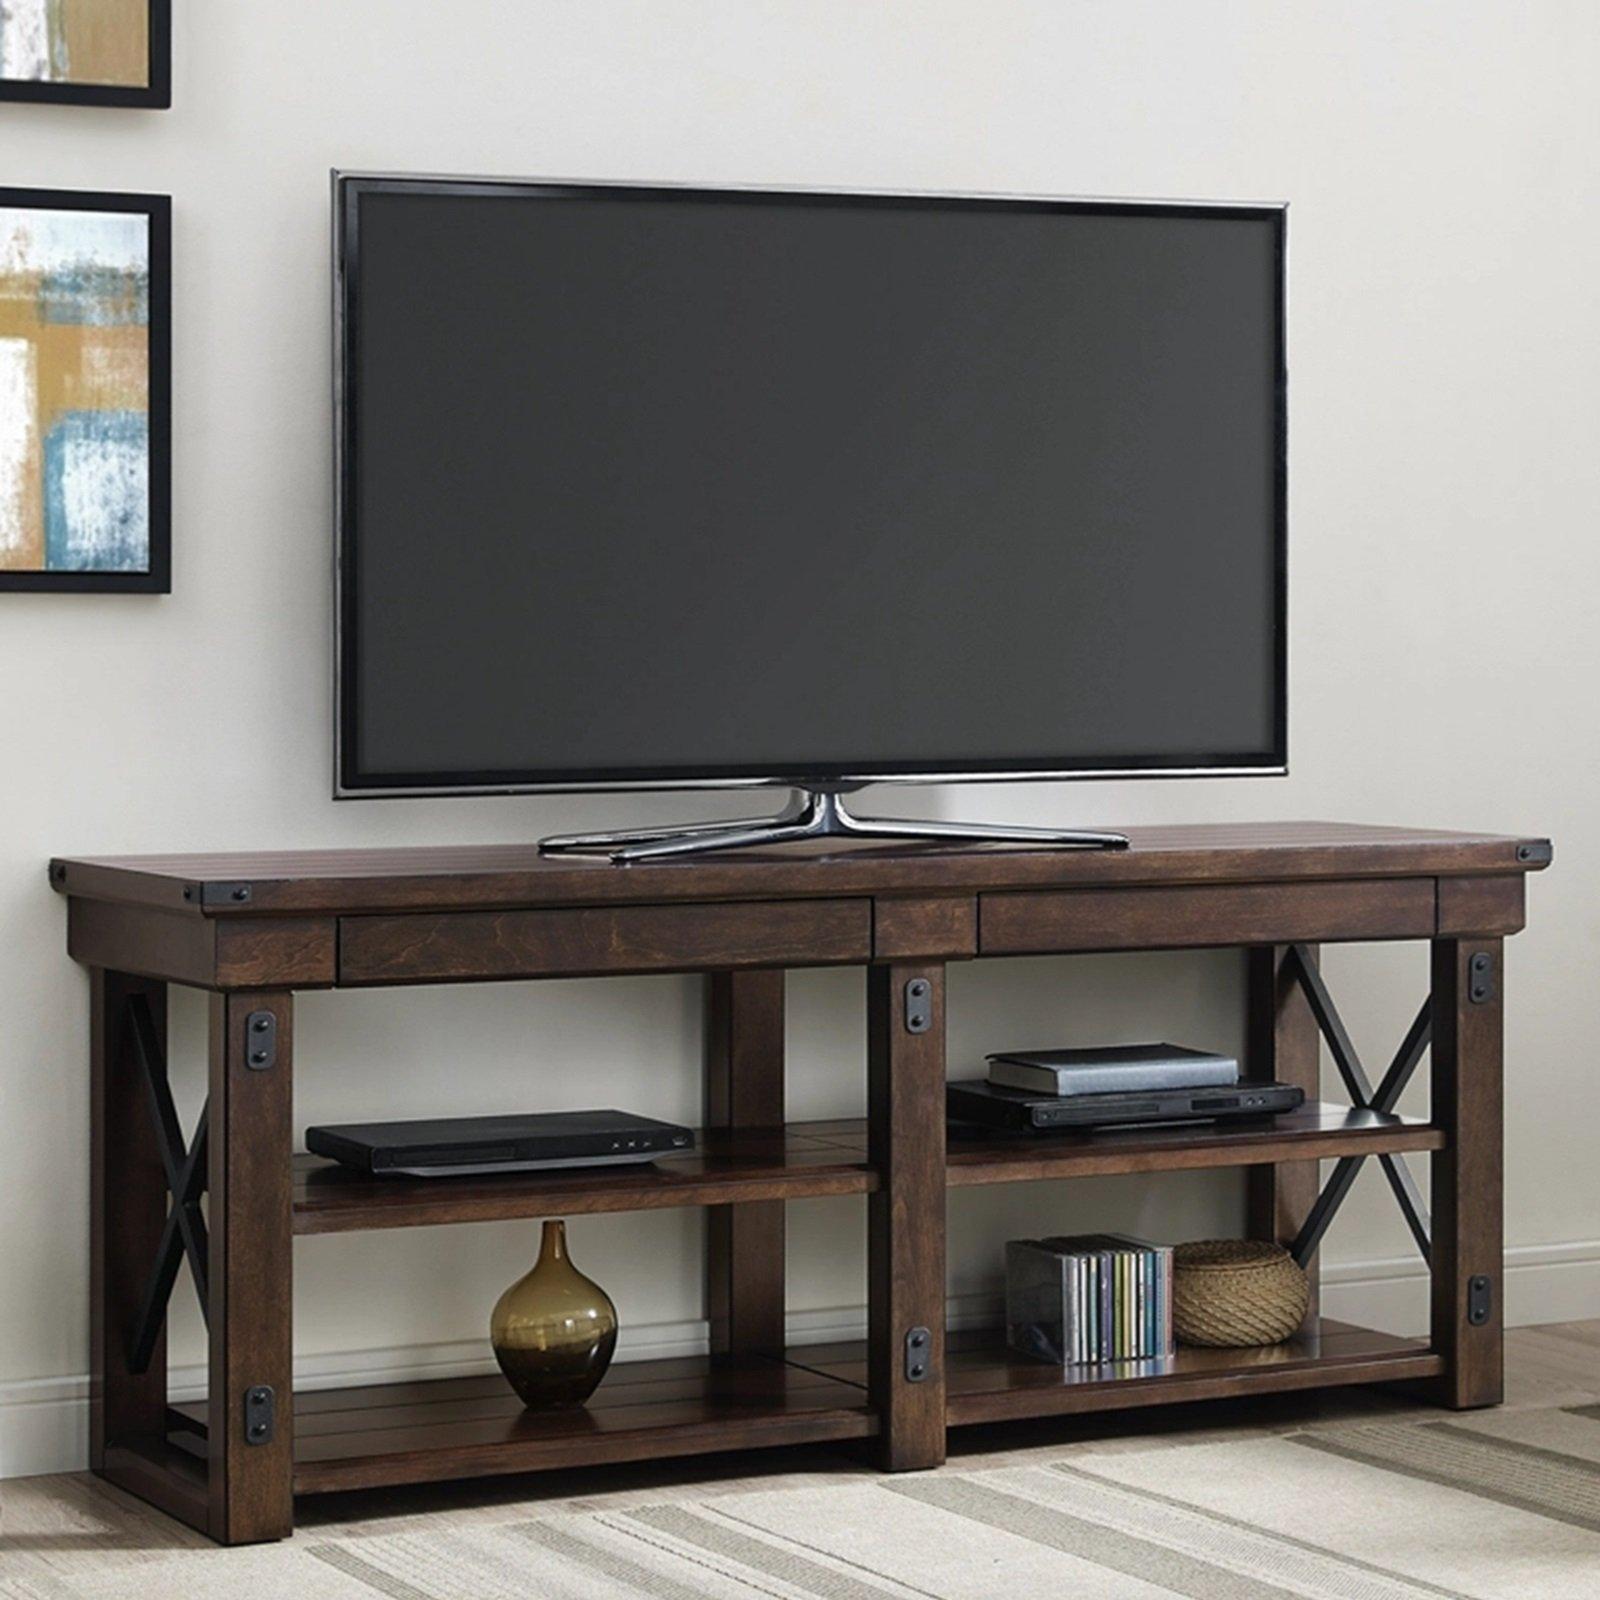 Rustic TV Stand Wooden Veneer Table With Drawers Shelves For Up To 65